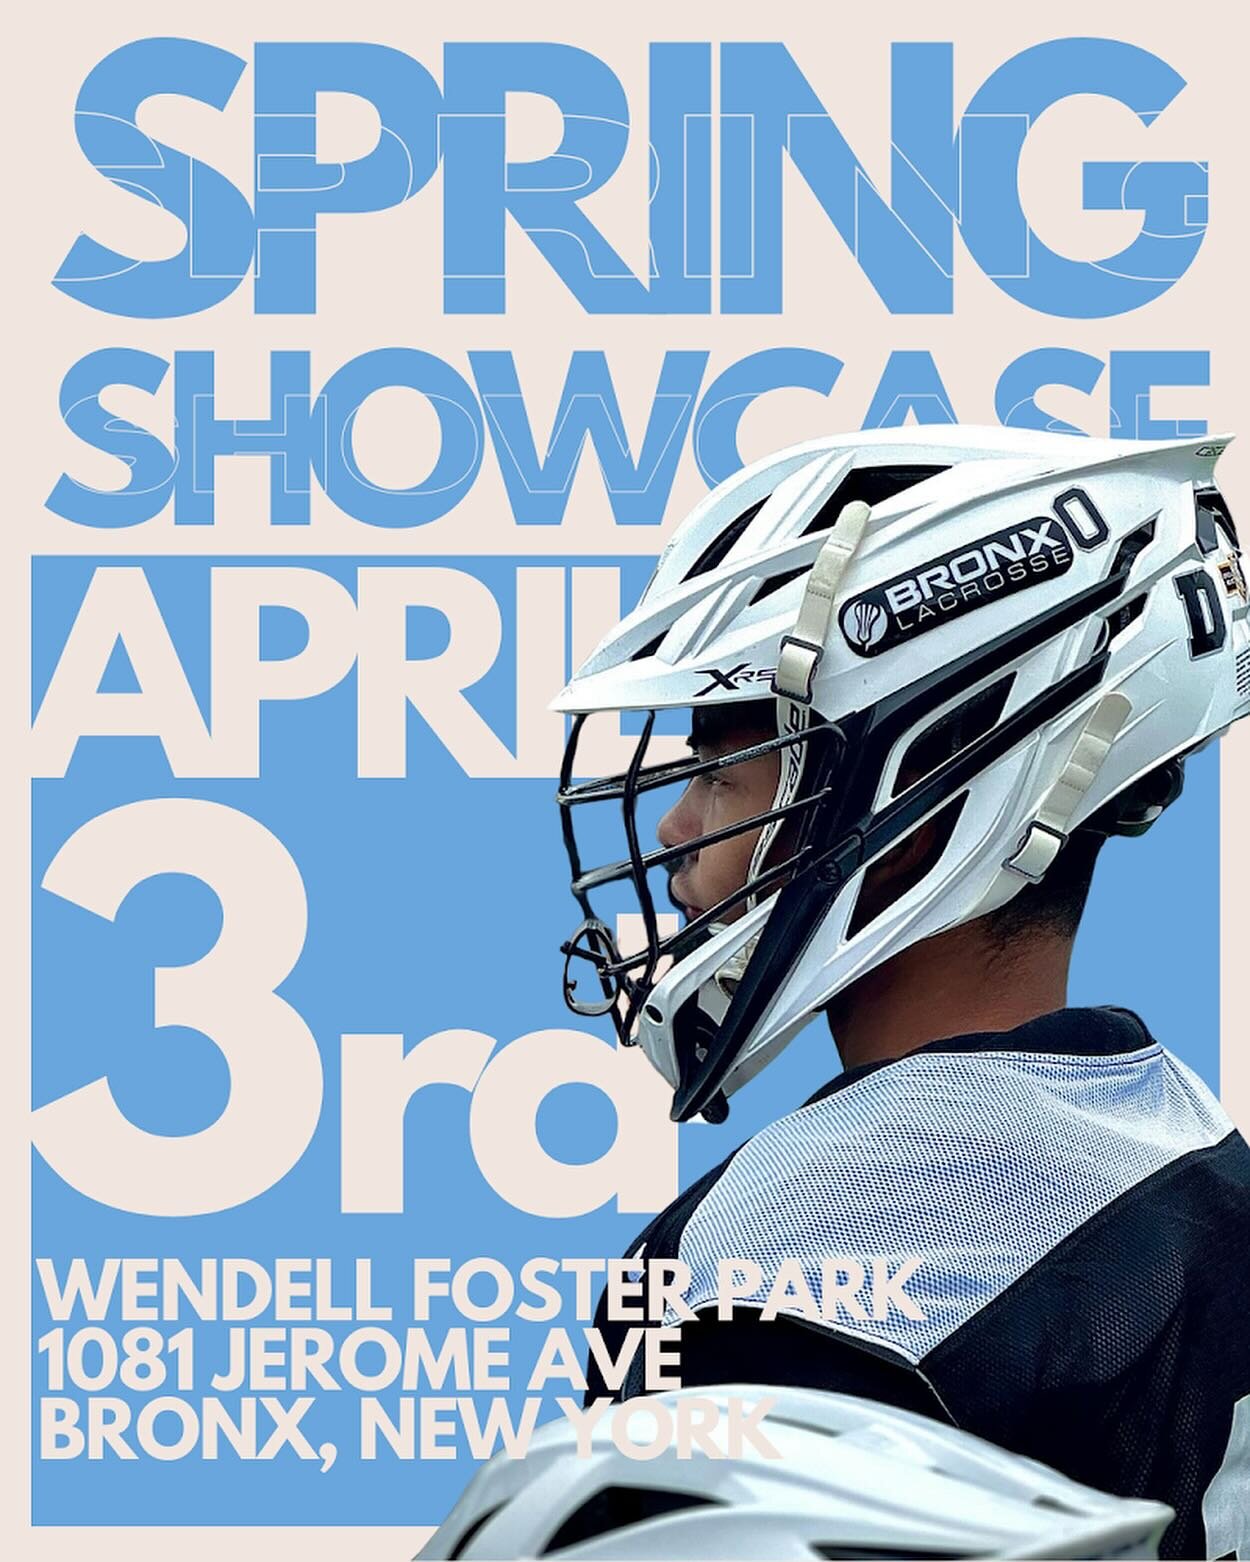 Come support our Student-Athletes 📚🥍competing against each other for our Boys Spring Showcase! The Games will start at 3:30 on April 3rd. Family, Friends, and All are invited to come and celebrate the life-changing game of Lacrosse. #community #gro